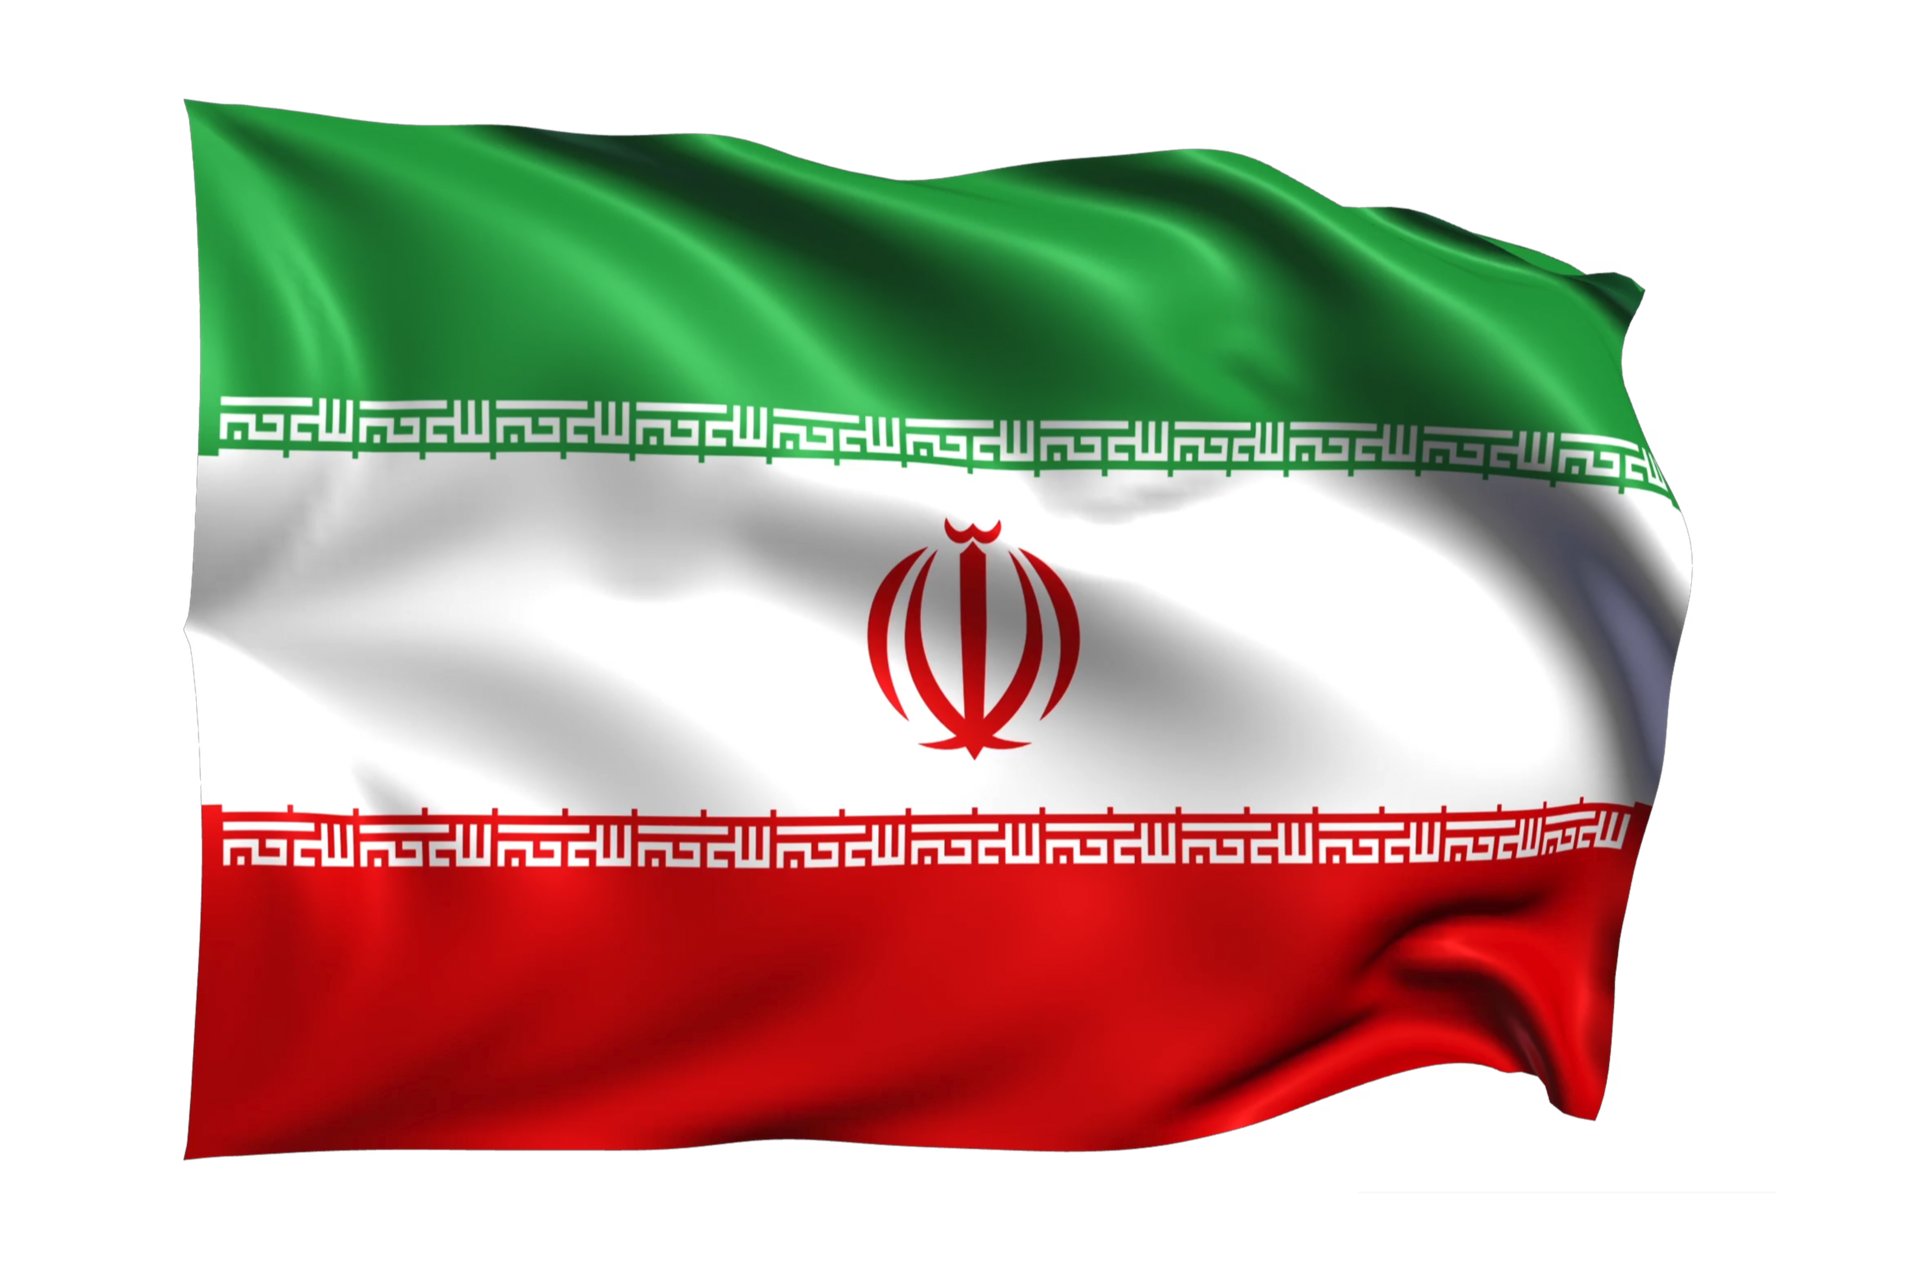 Iran Flag PNG Free Images with Transparent Background - (74 Free Downloads)